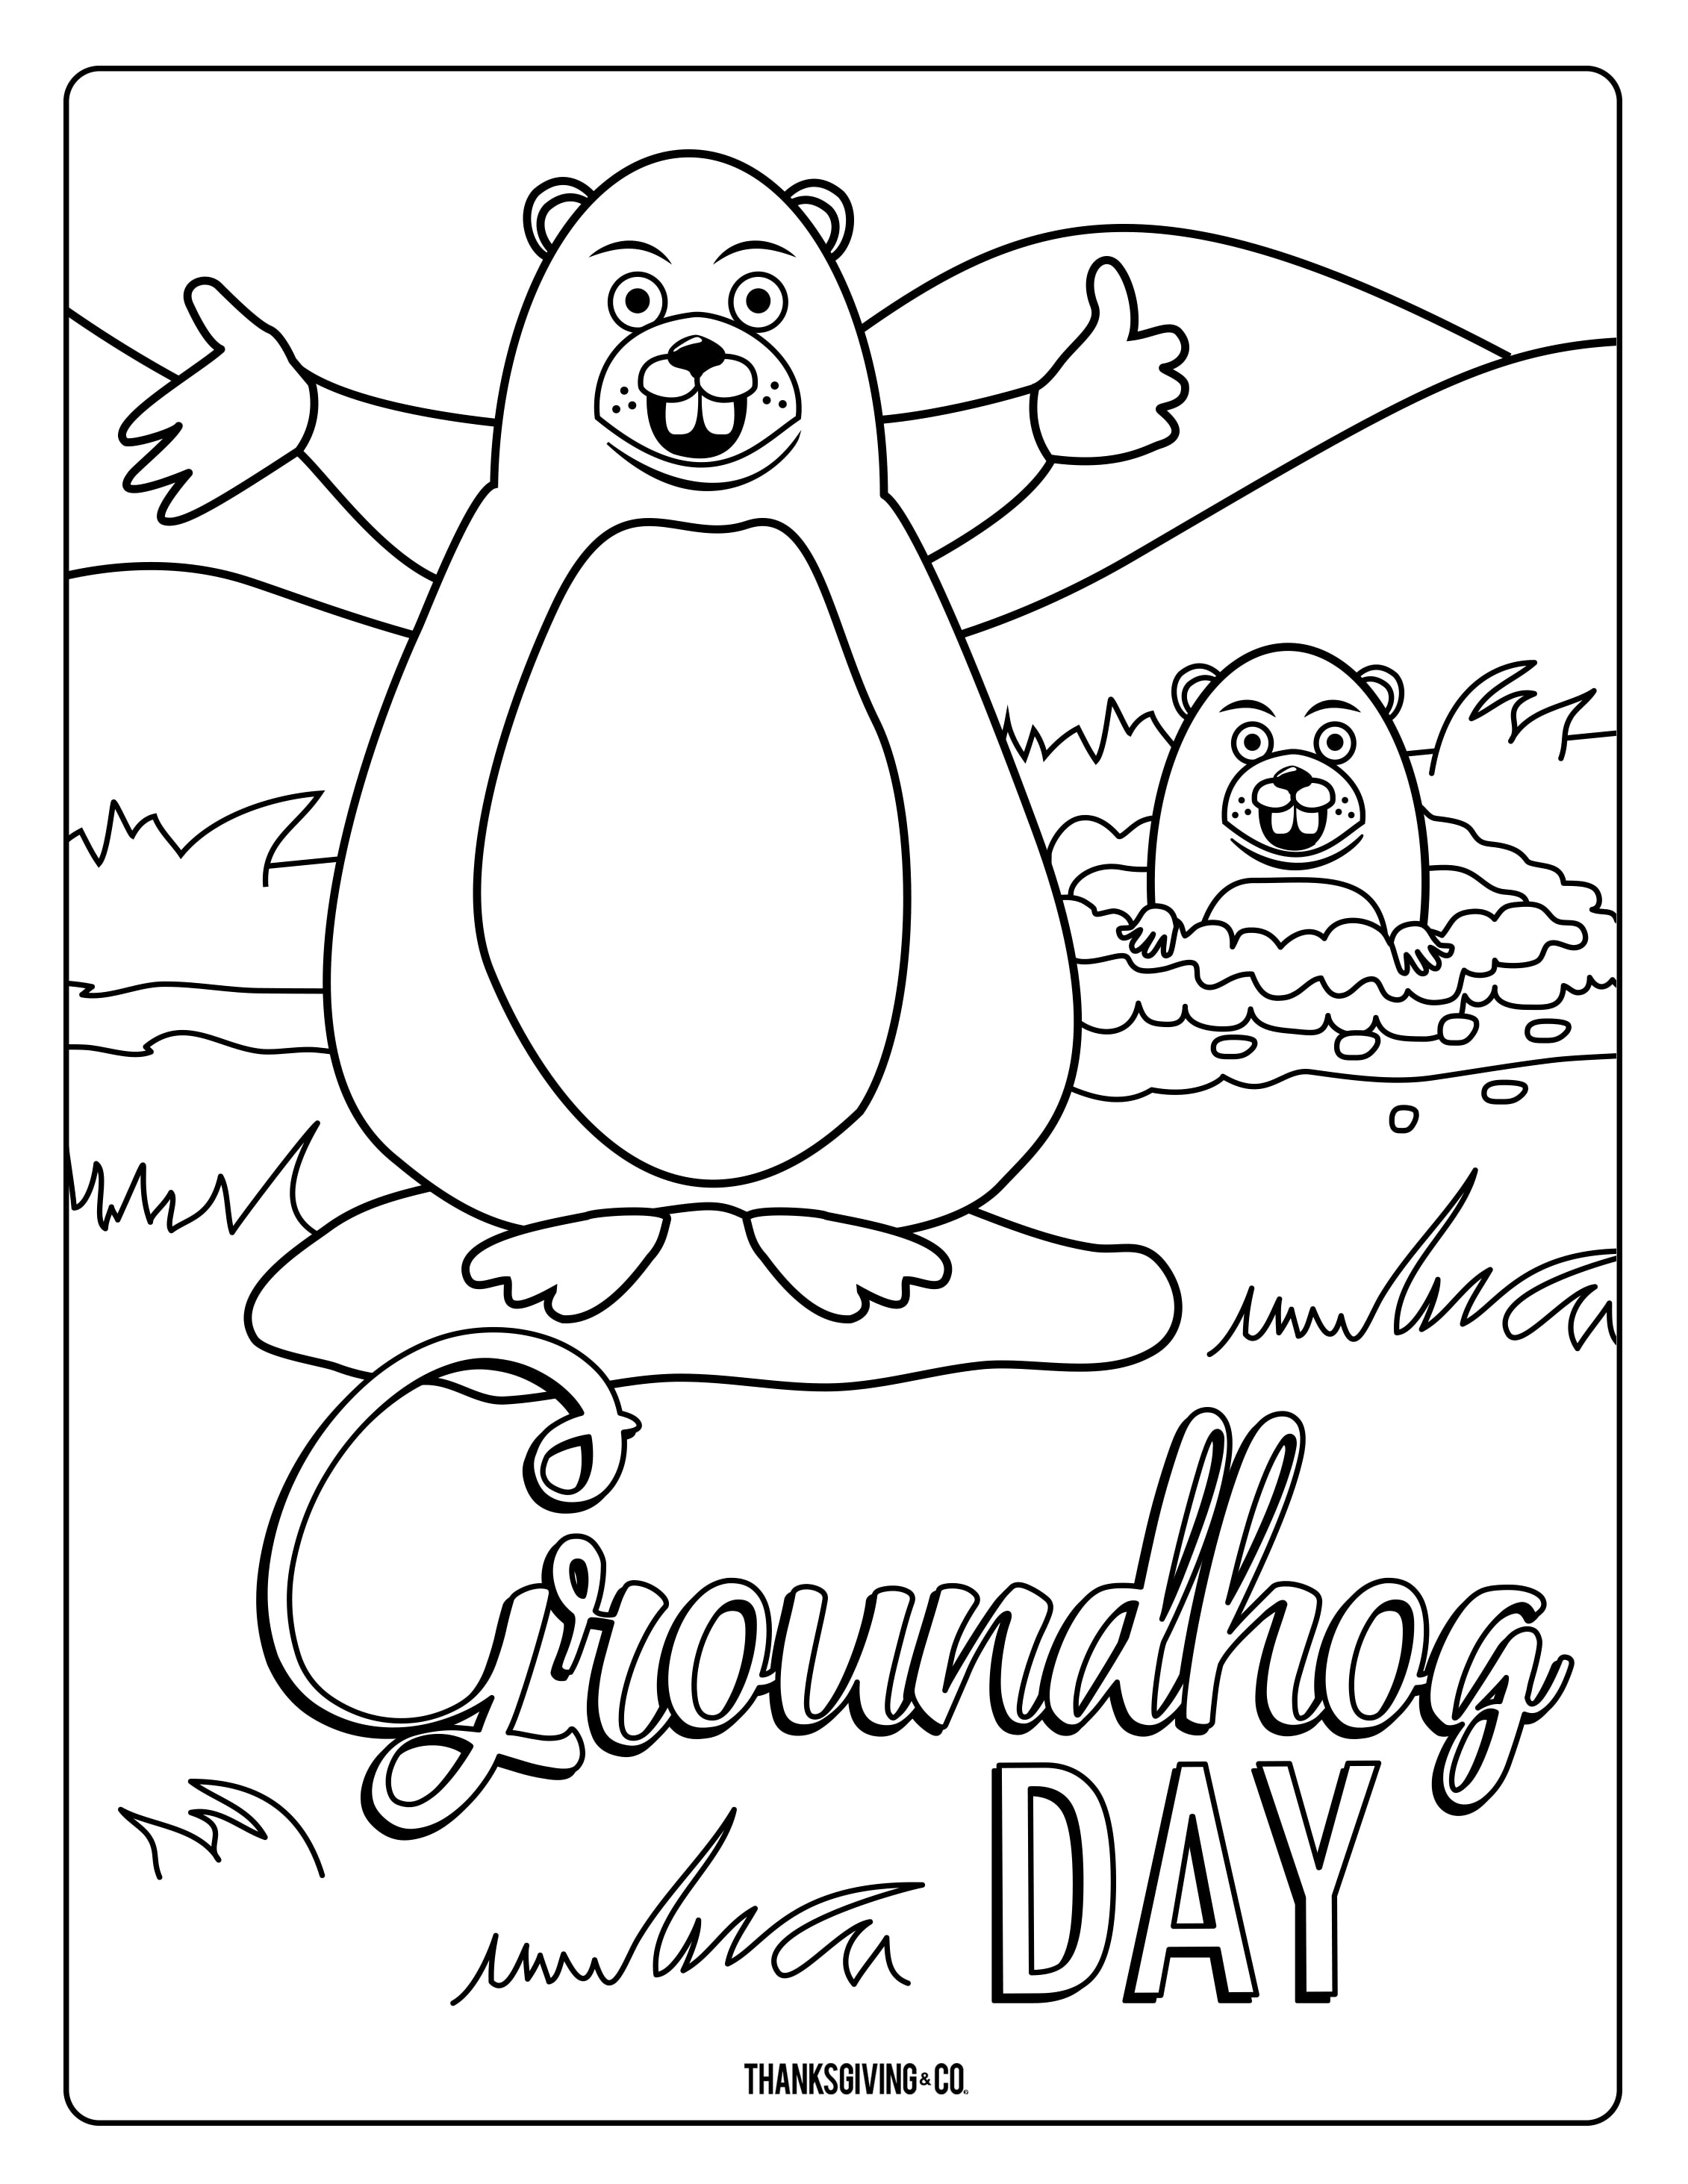 groundhog-day-coloring-pages